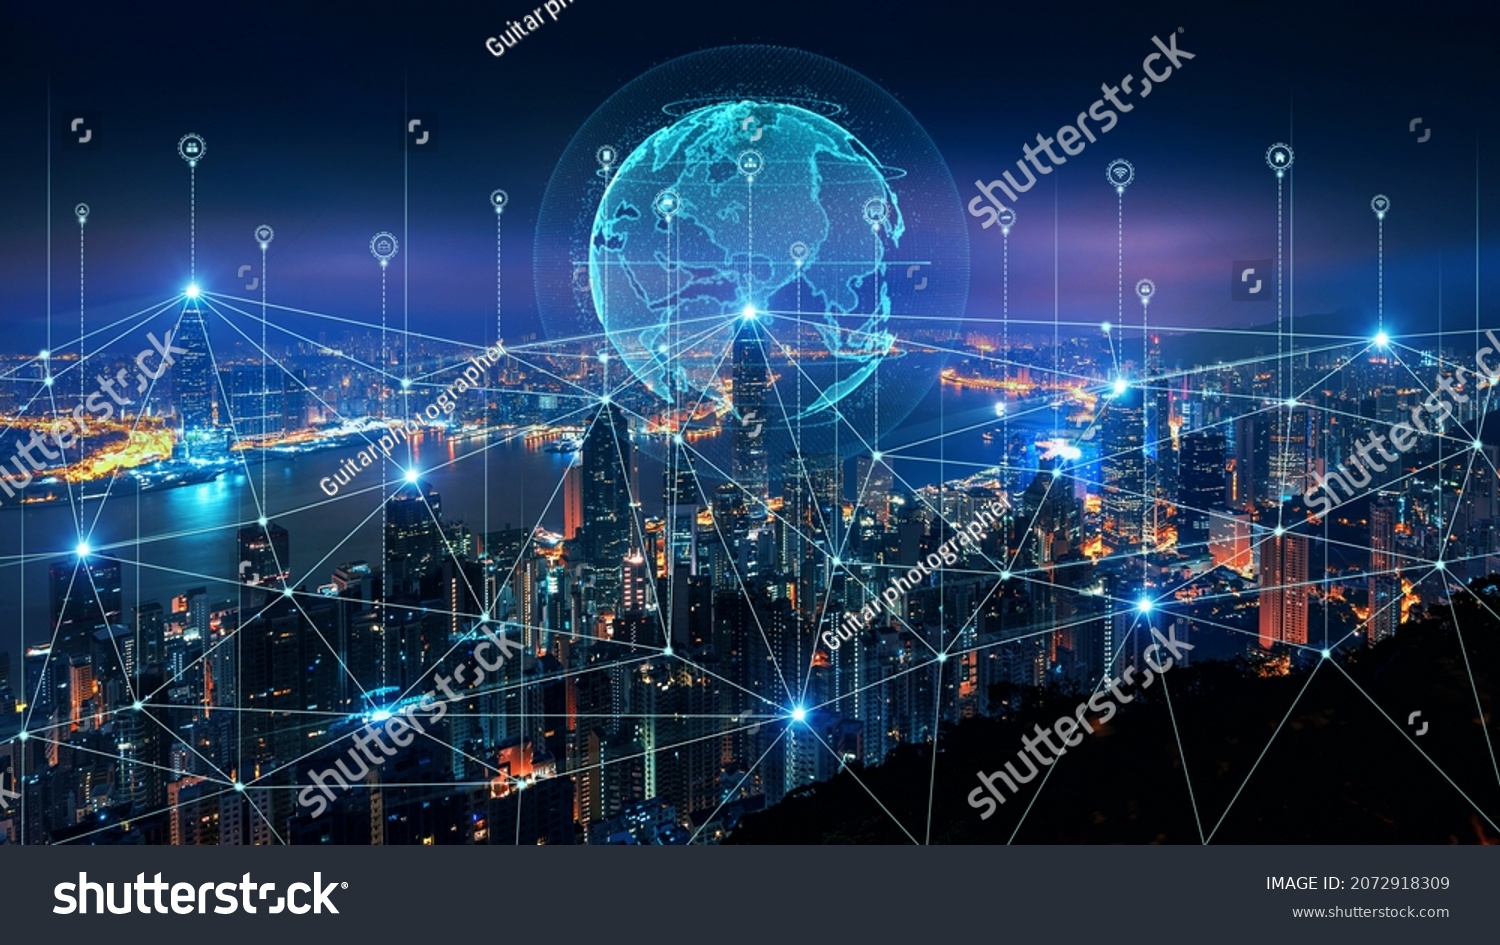 Smart connection network system, smart city network concept, 5G wireless connection. #2072918309